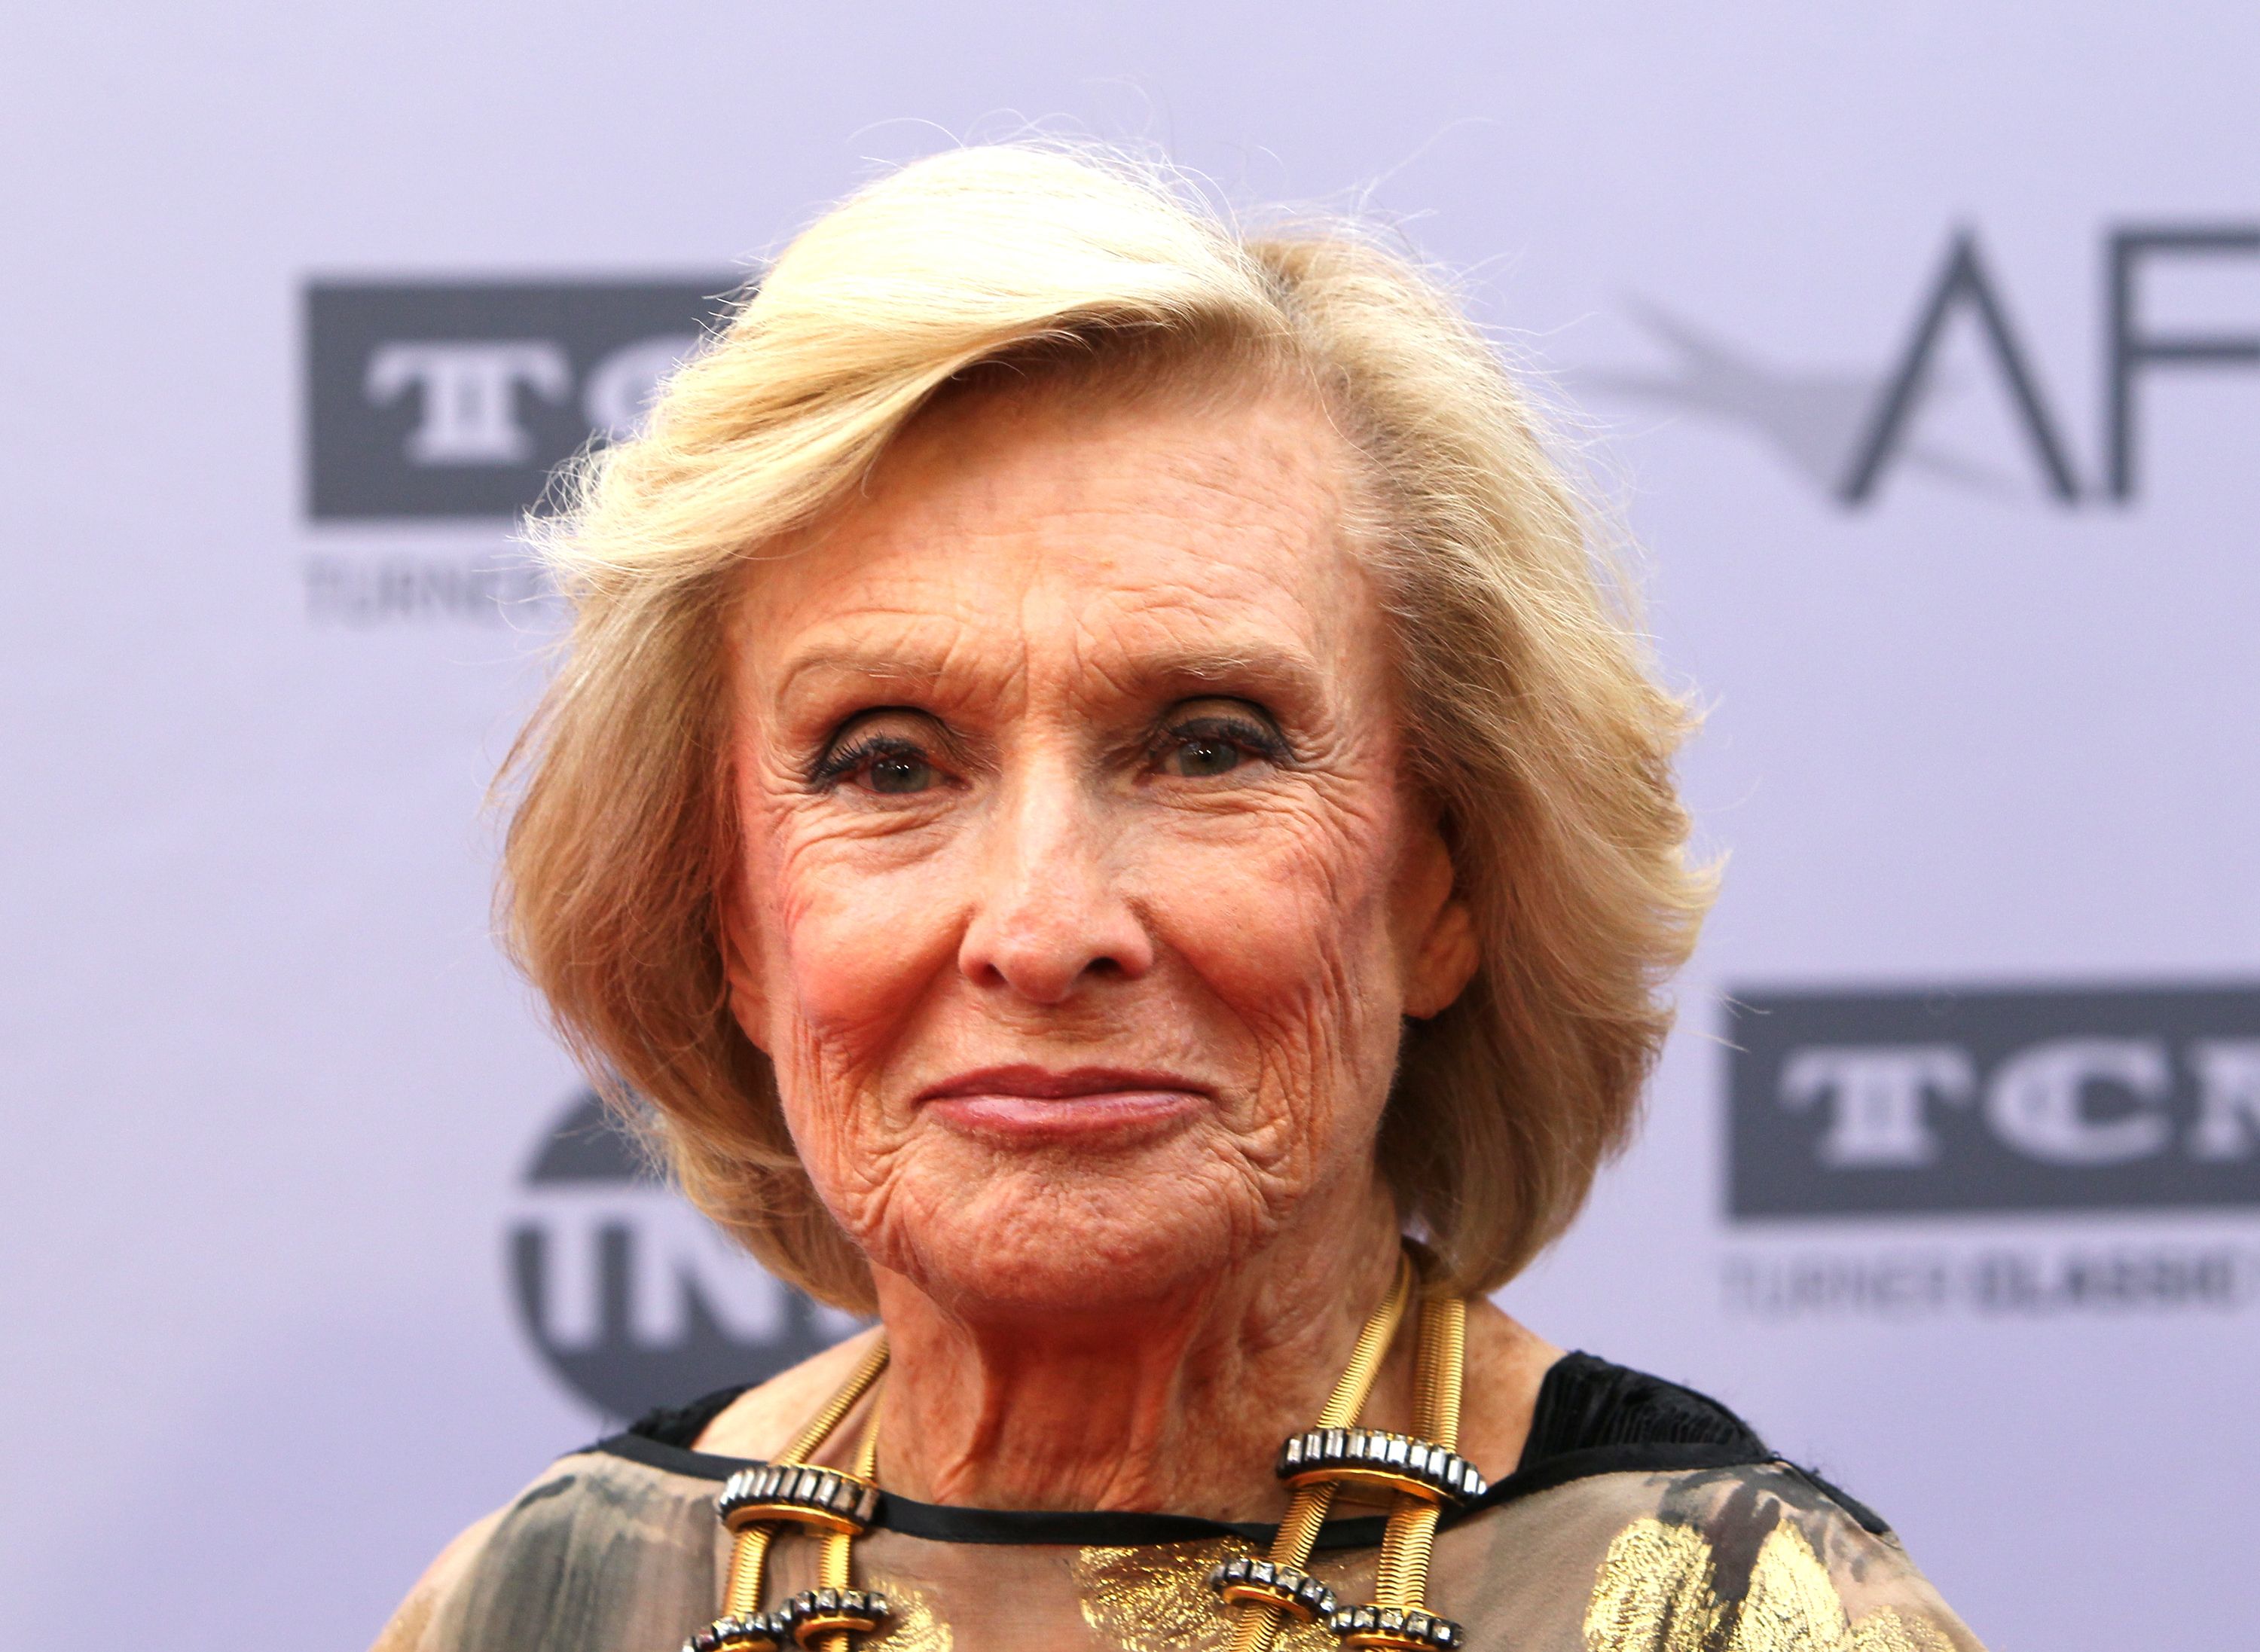 Cloris Leachman at the American Film Institute's 44th Life Achievement Award Gala Tribute to John Williams on June 9, 2016 | Photo: Getty Images